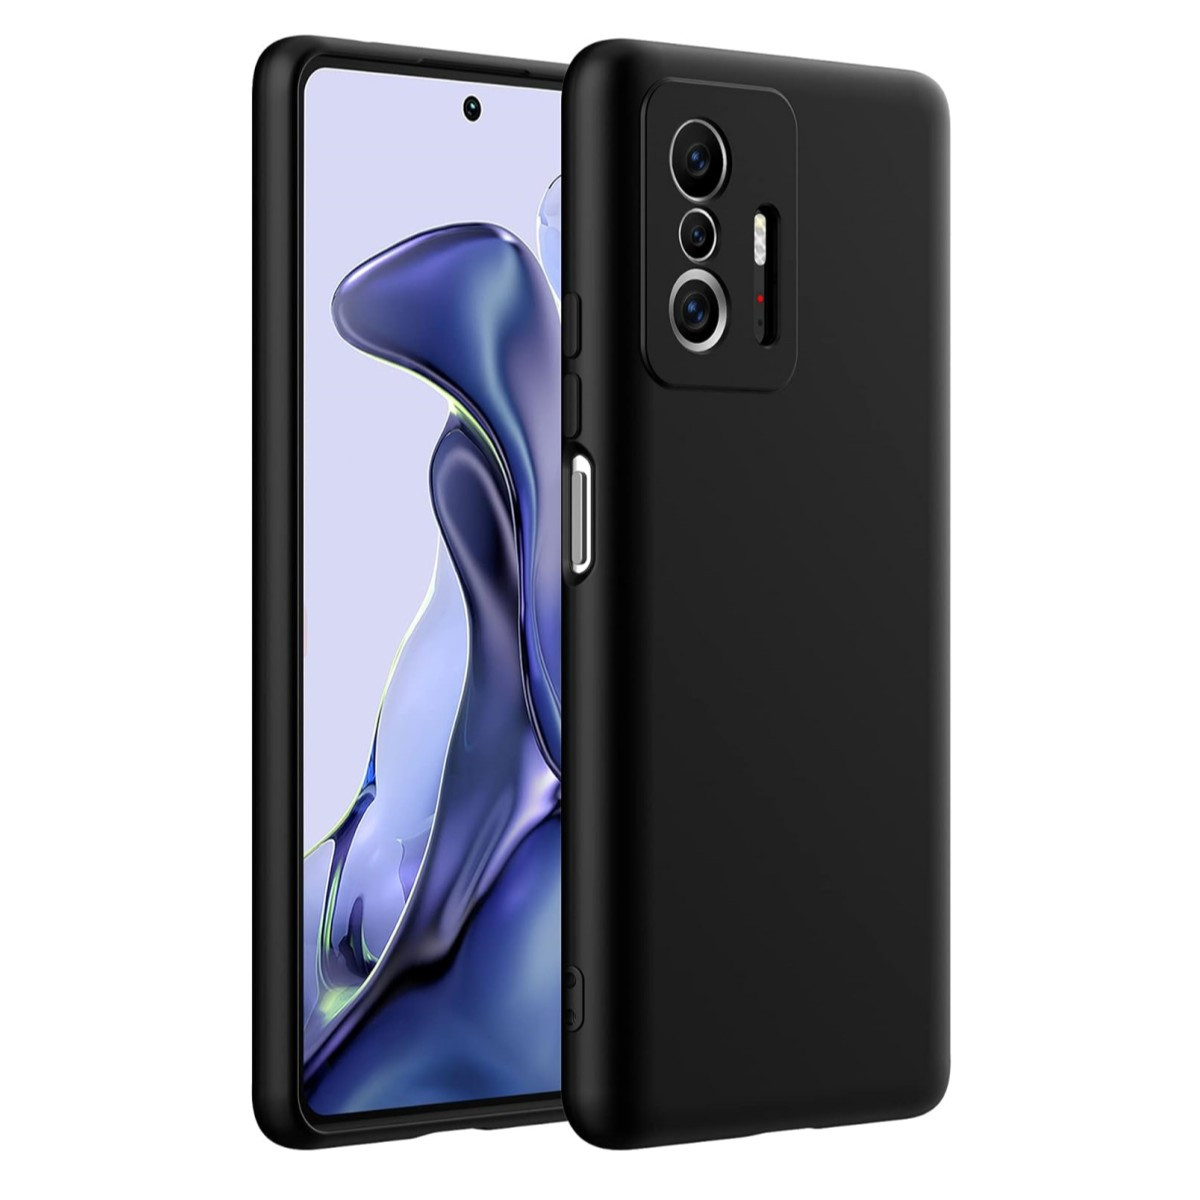 

Case For Xiaomi 11t/ Xiaomi 11t Pro Case, Thin Tpu Cover With Camera Protection Soft Interior Anti-scratch Slim Fit Flexible Phone Case For Xiaomi 11t/ 11t Pro 5g (2021) Black